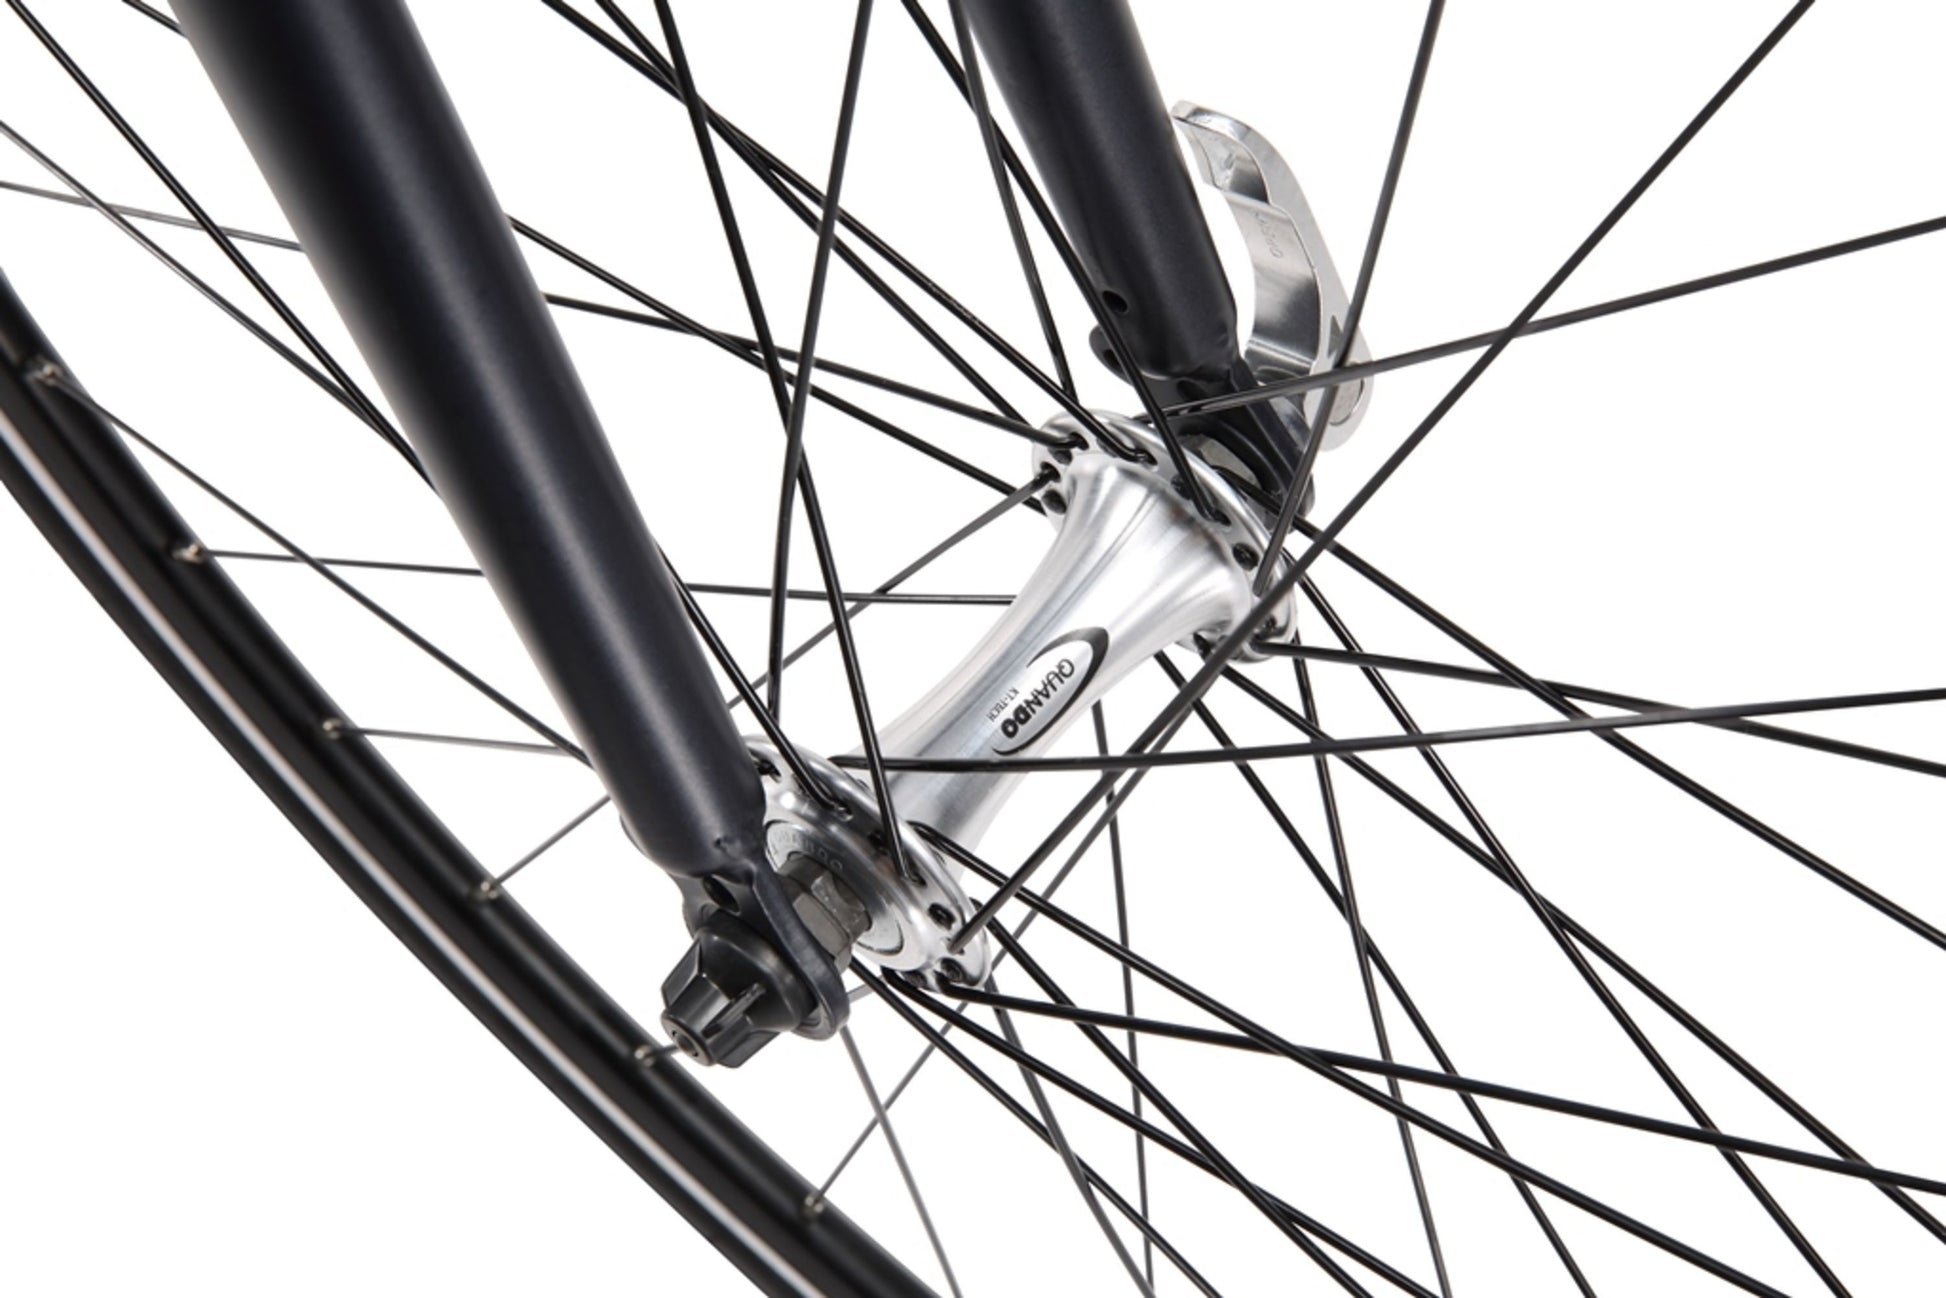 The Express Road in Gunmetal Grey showing quick release front hub from Reid Cycles Australia